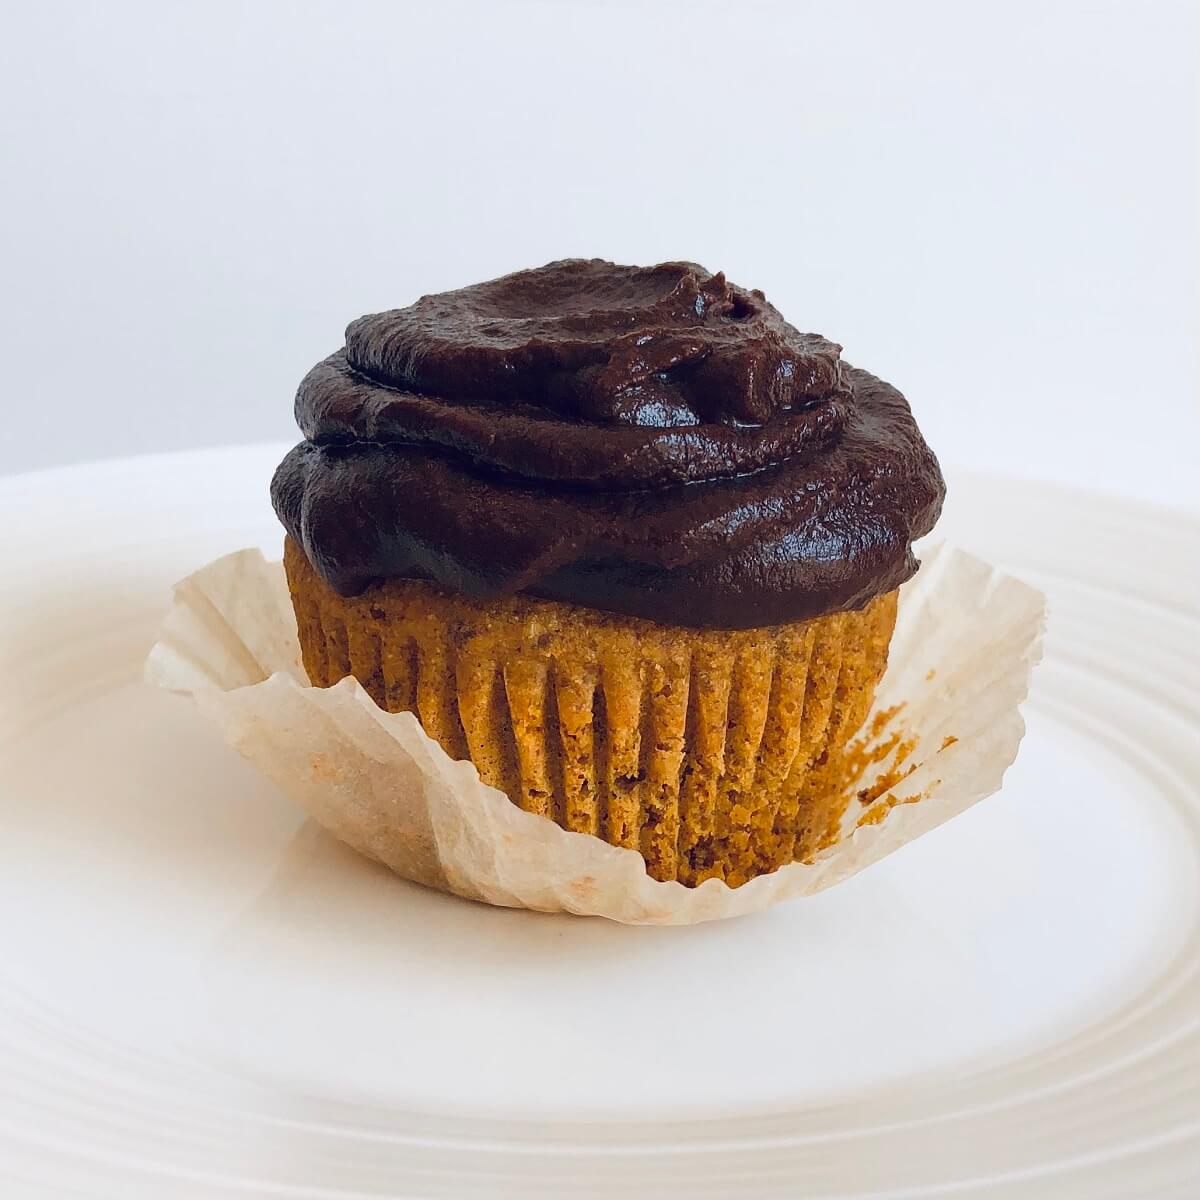 A cupcake with chocolate frosting on a white plate.